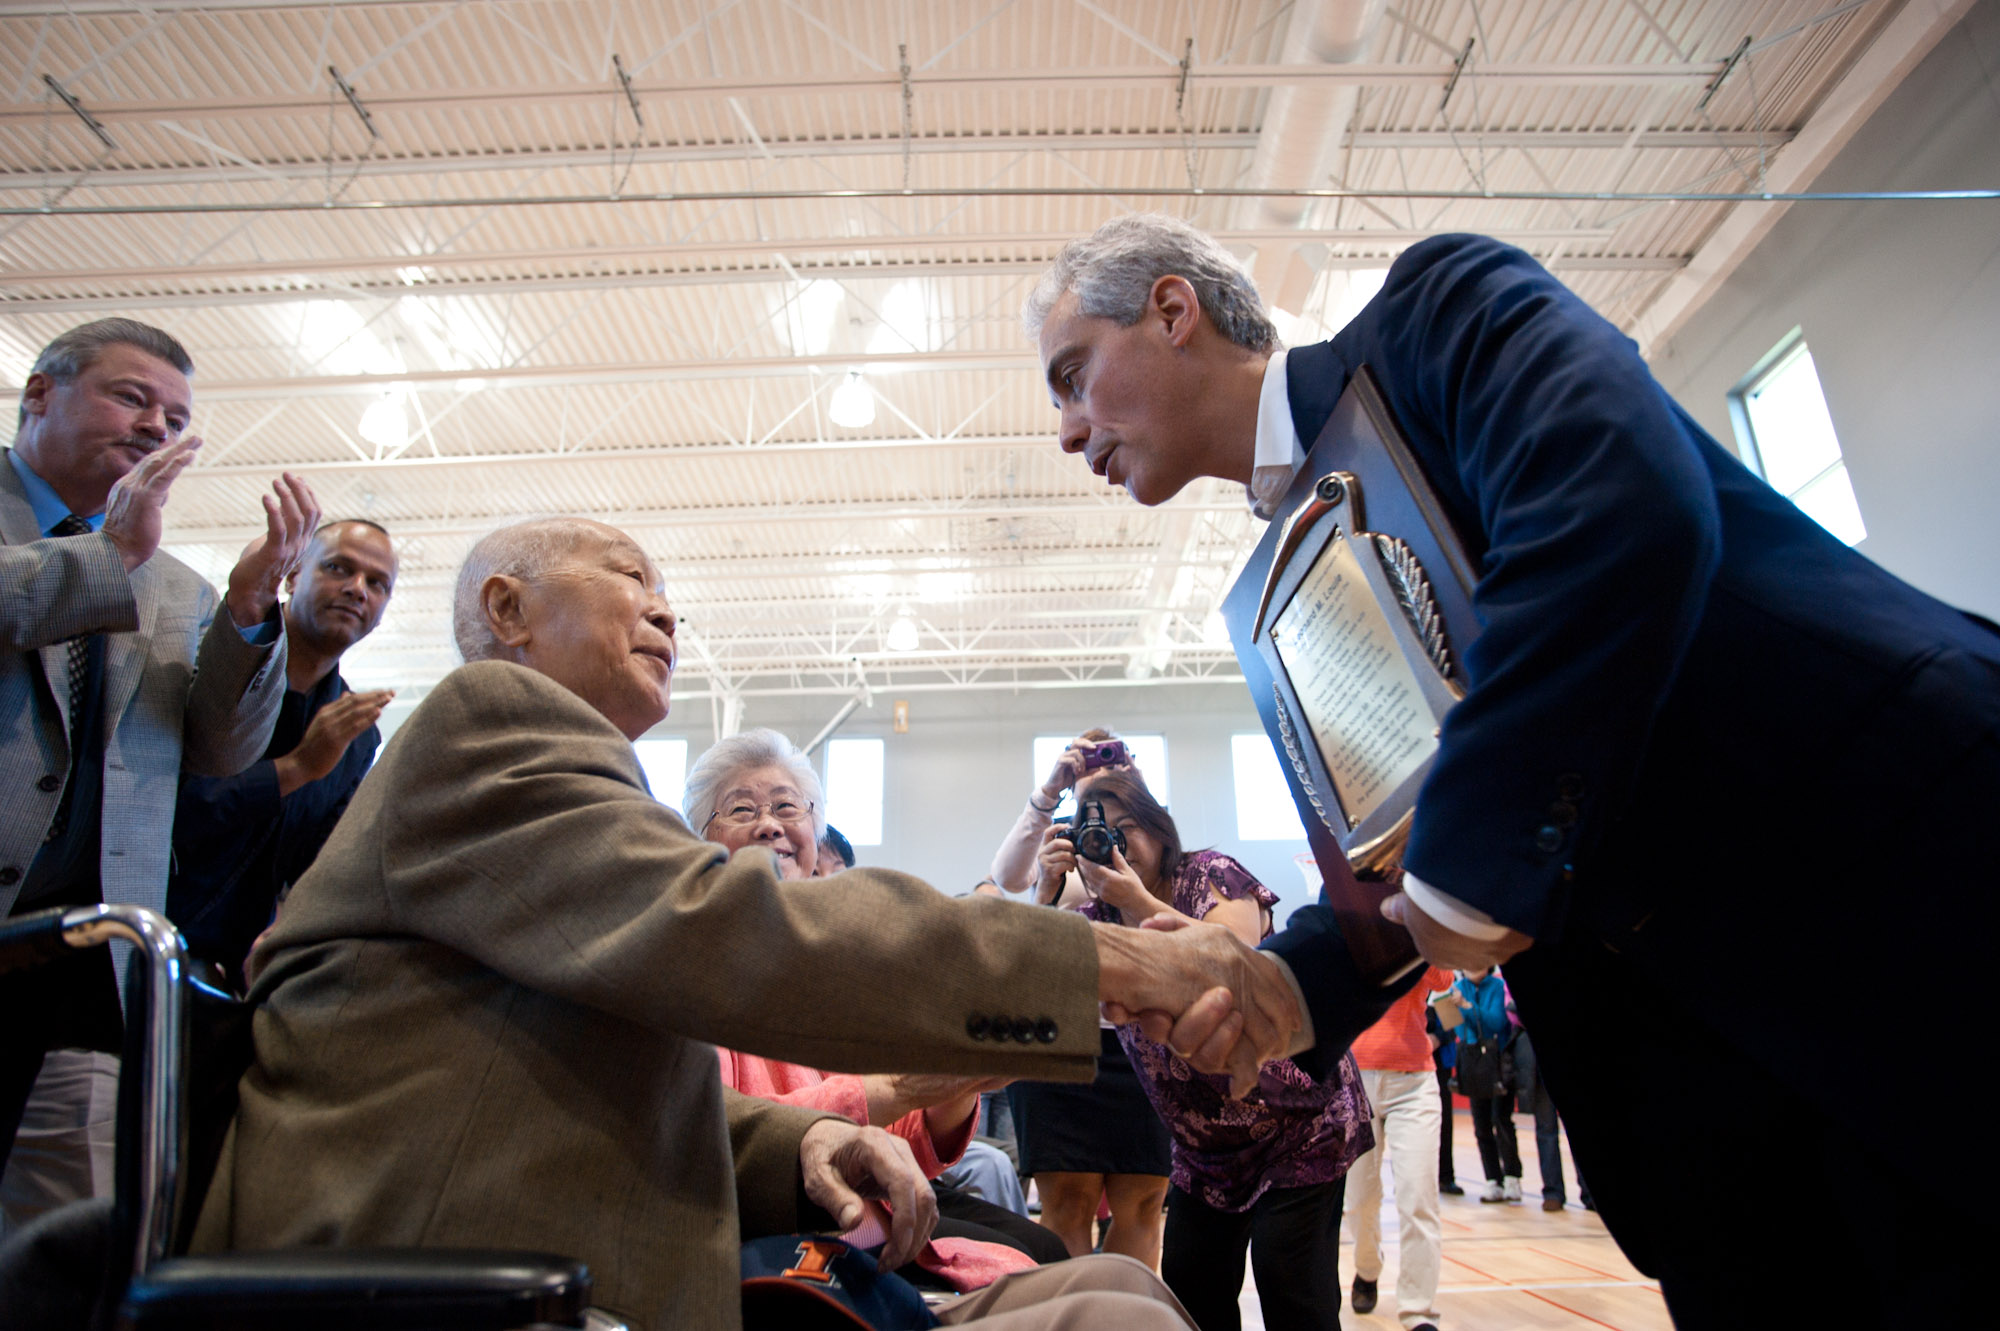 Mayor Rahm Emanuel presents a plaque to community leader Leonard Louie for his lifetime of service to the Chinatown community.